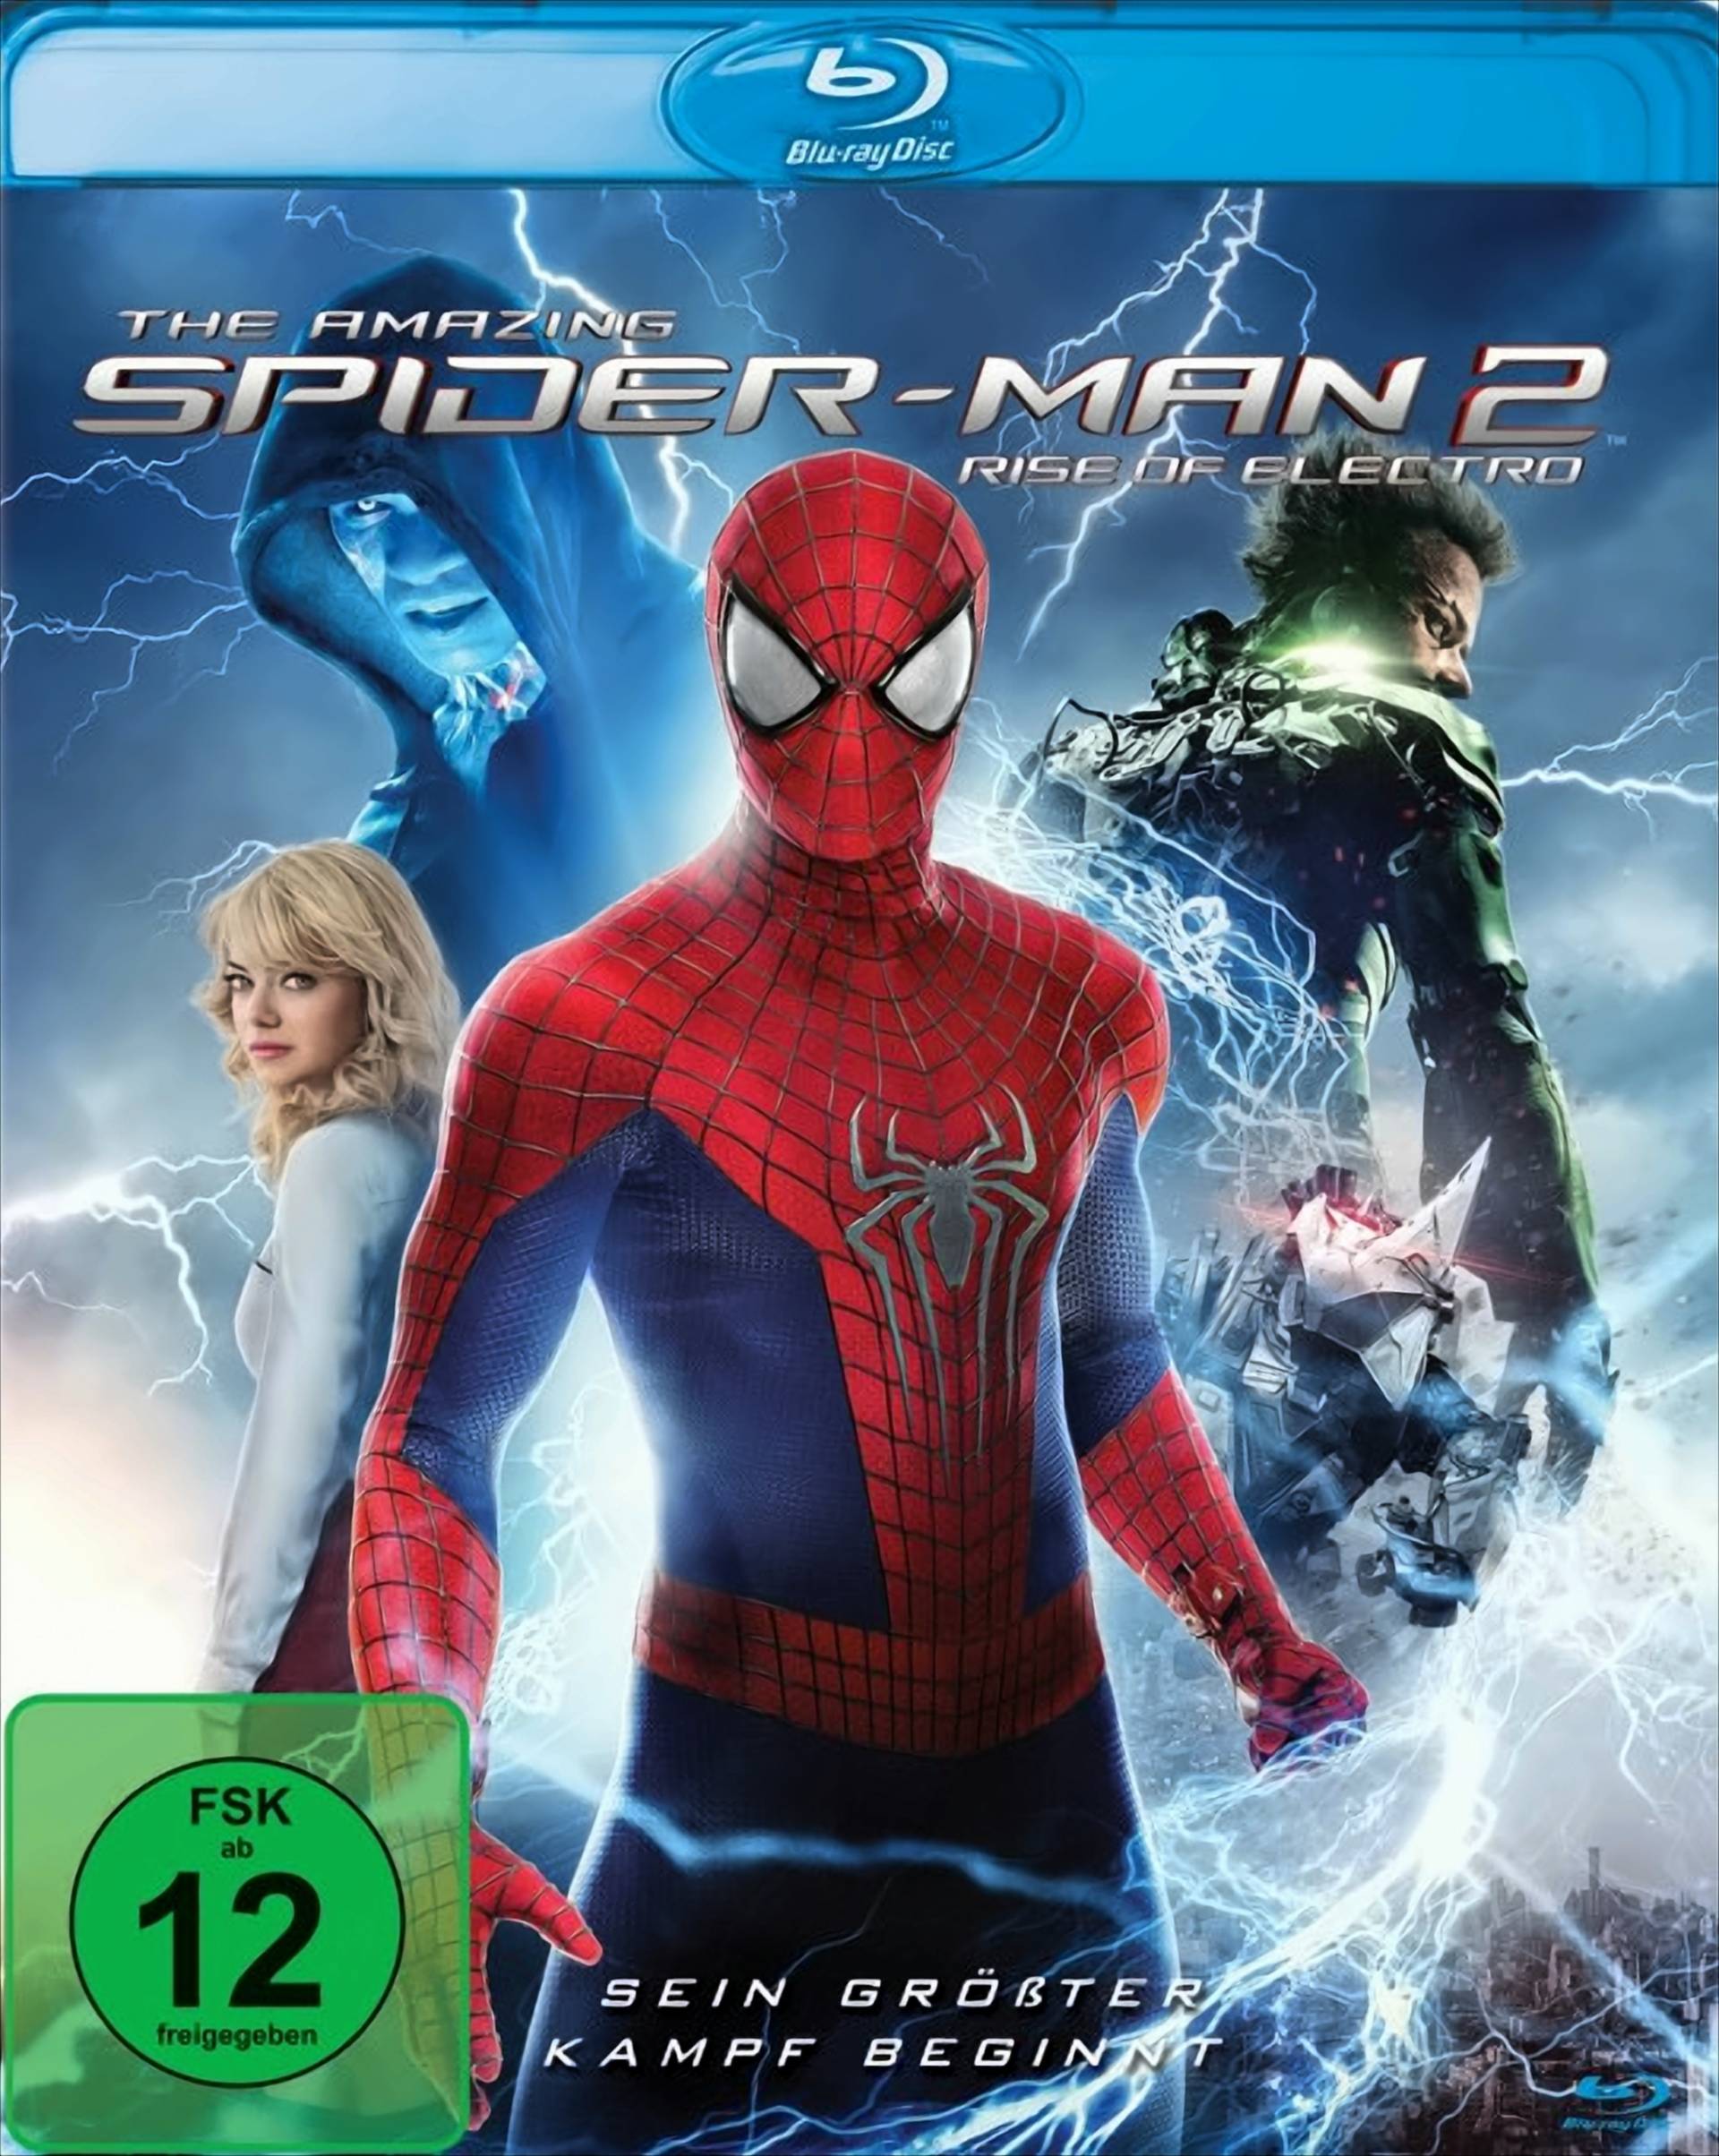 The Amazing Spider-Man 2: Rise of Electro von Sony Pictures